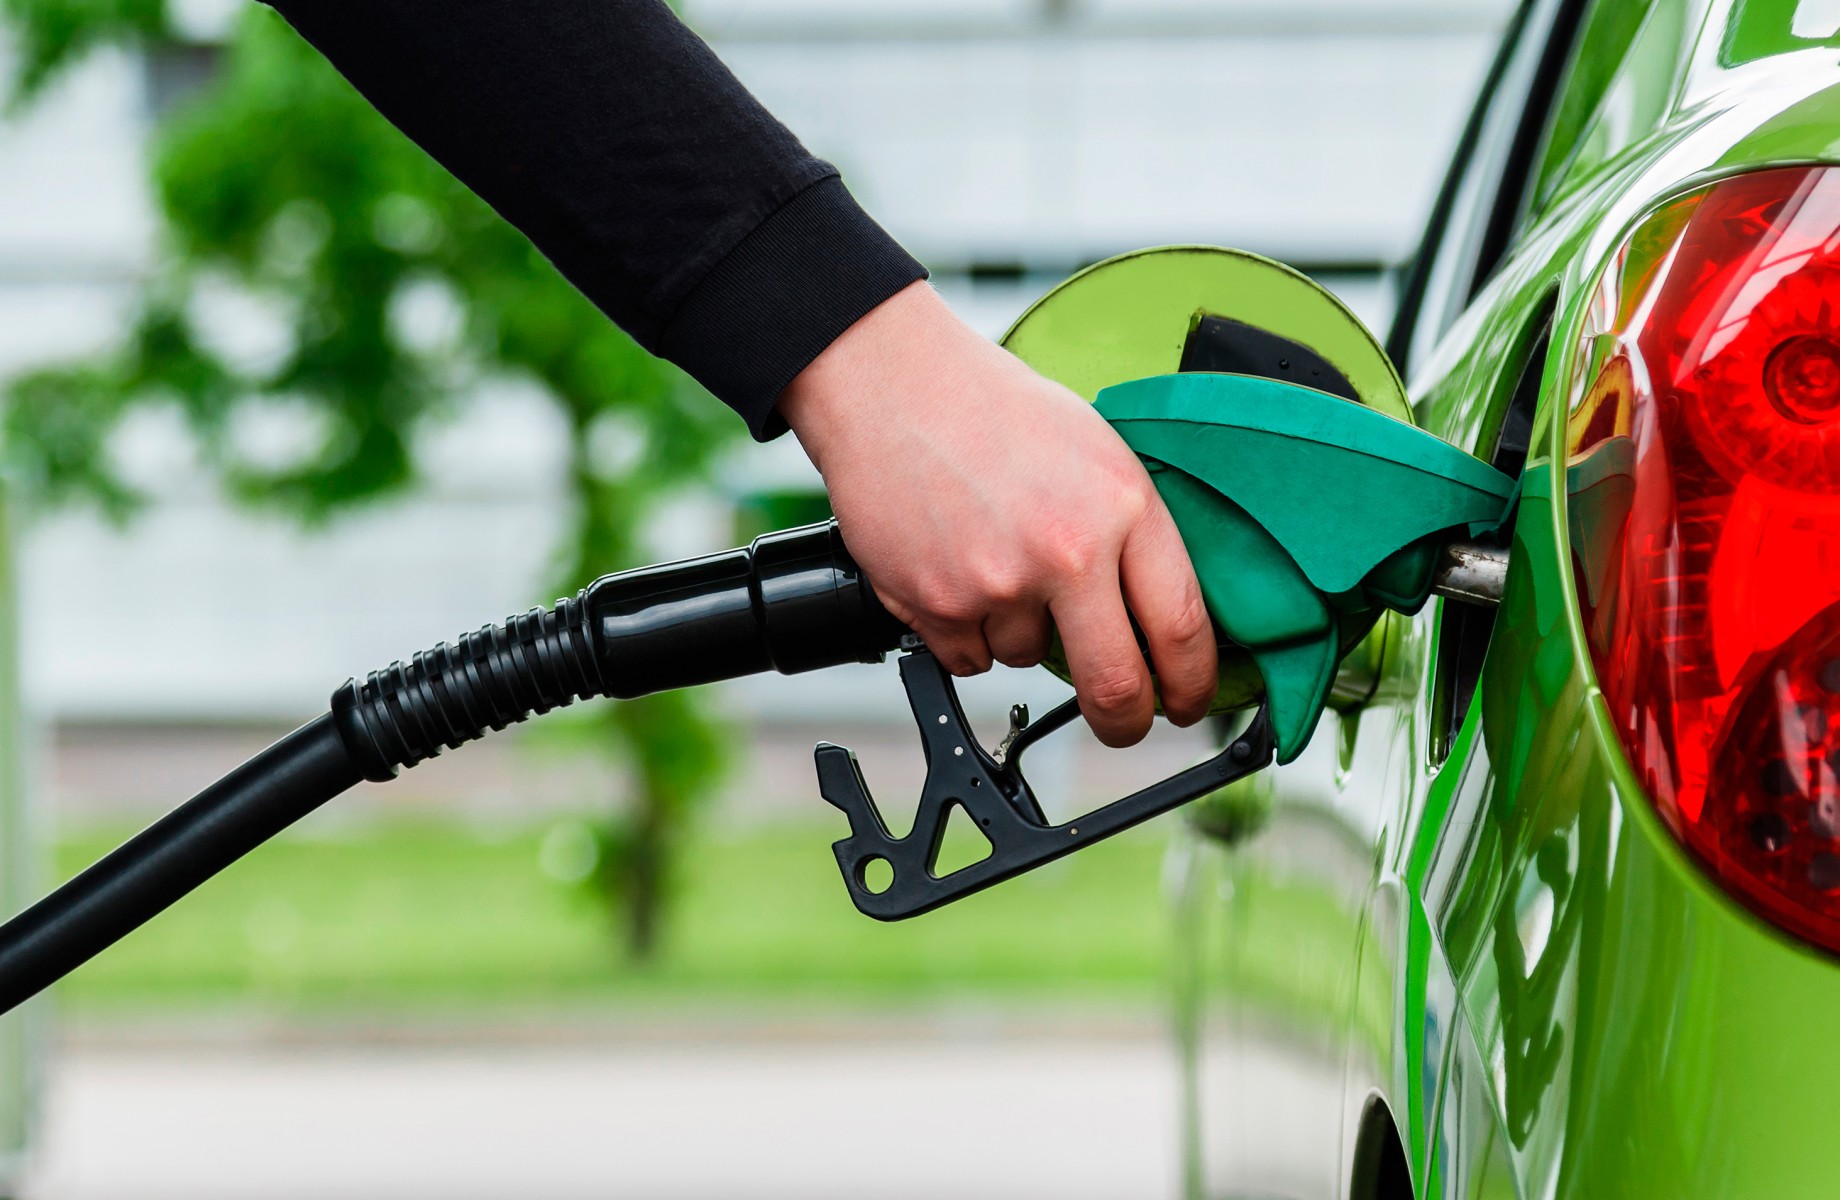 NEWS | Asda has today announced that it has cut the price of unleaded by 5p per litre and diesel by 3p per litre